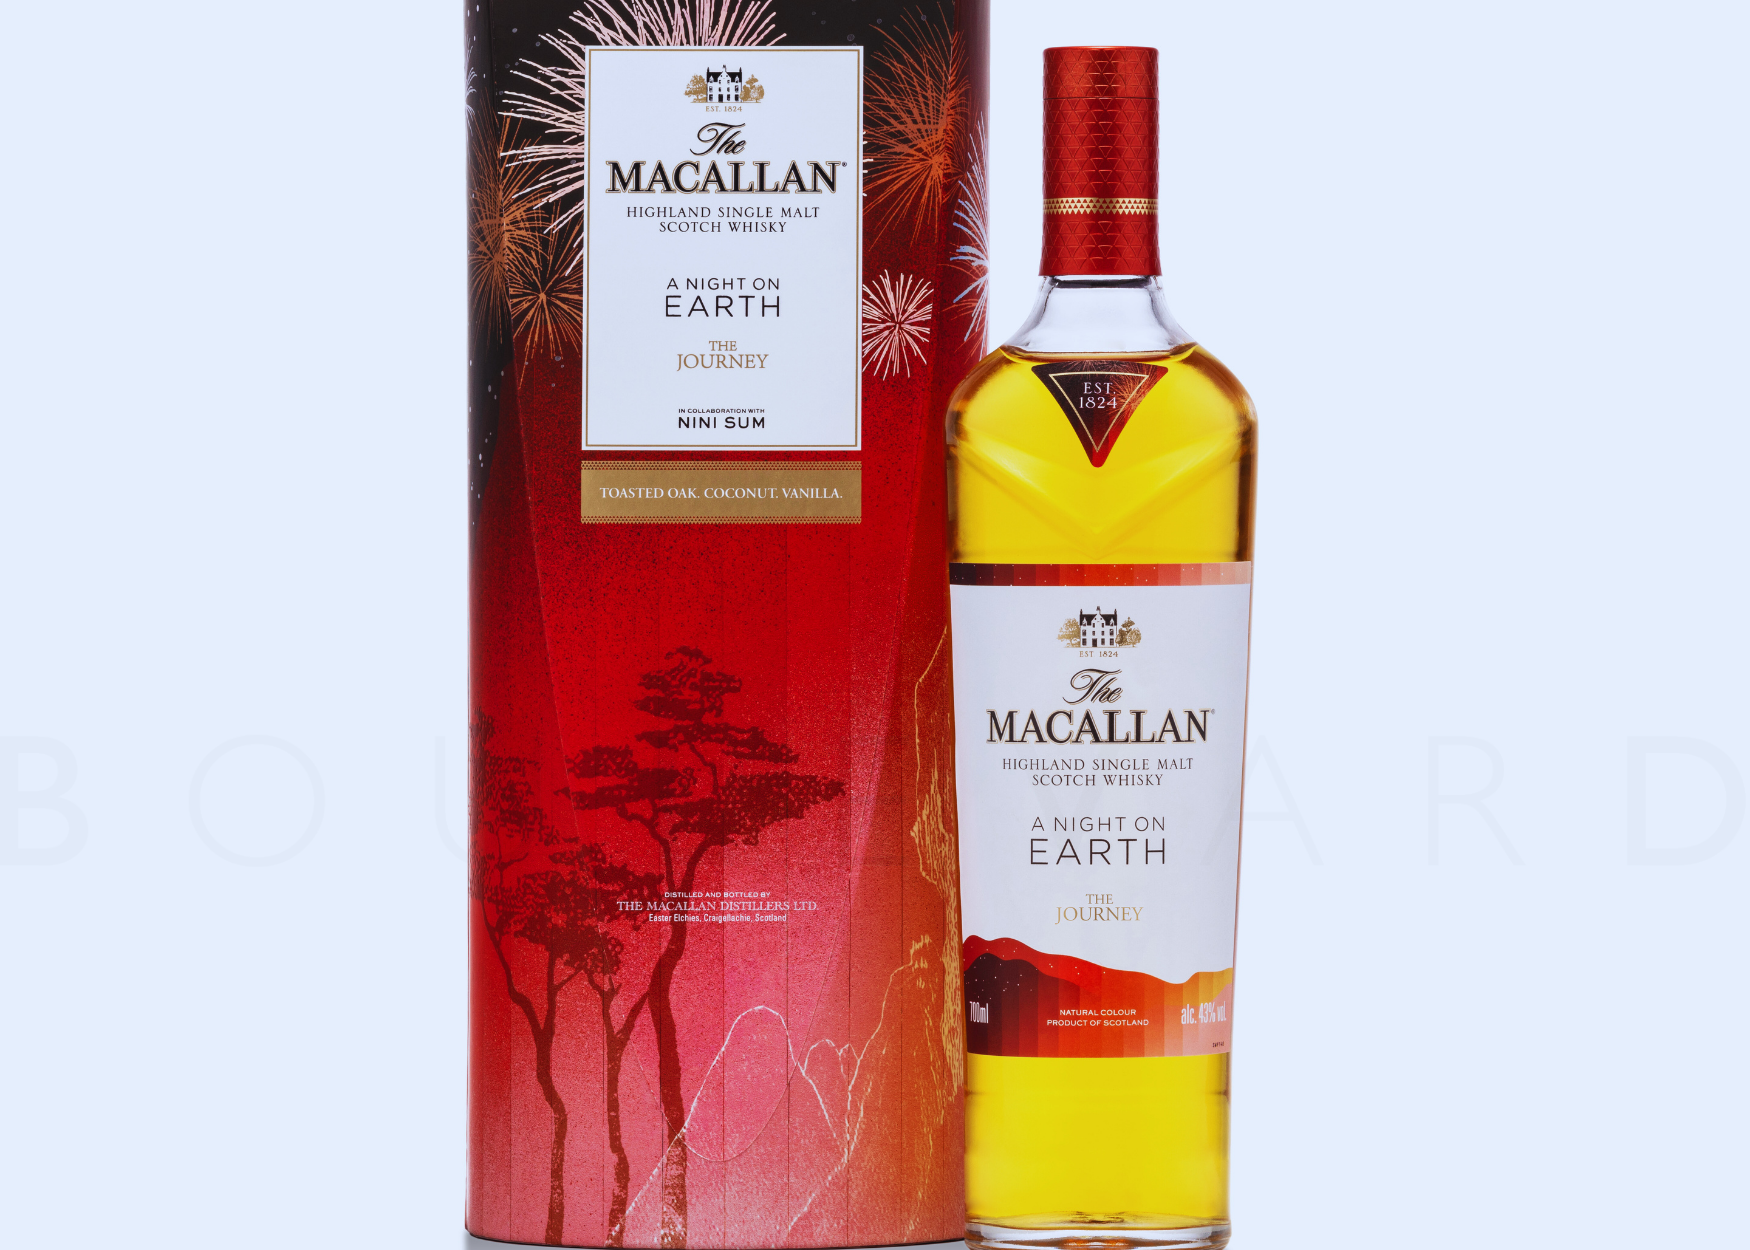 Macallan's The Journey celebrates the beauty of the Lunar New Year